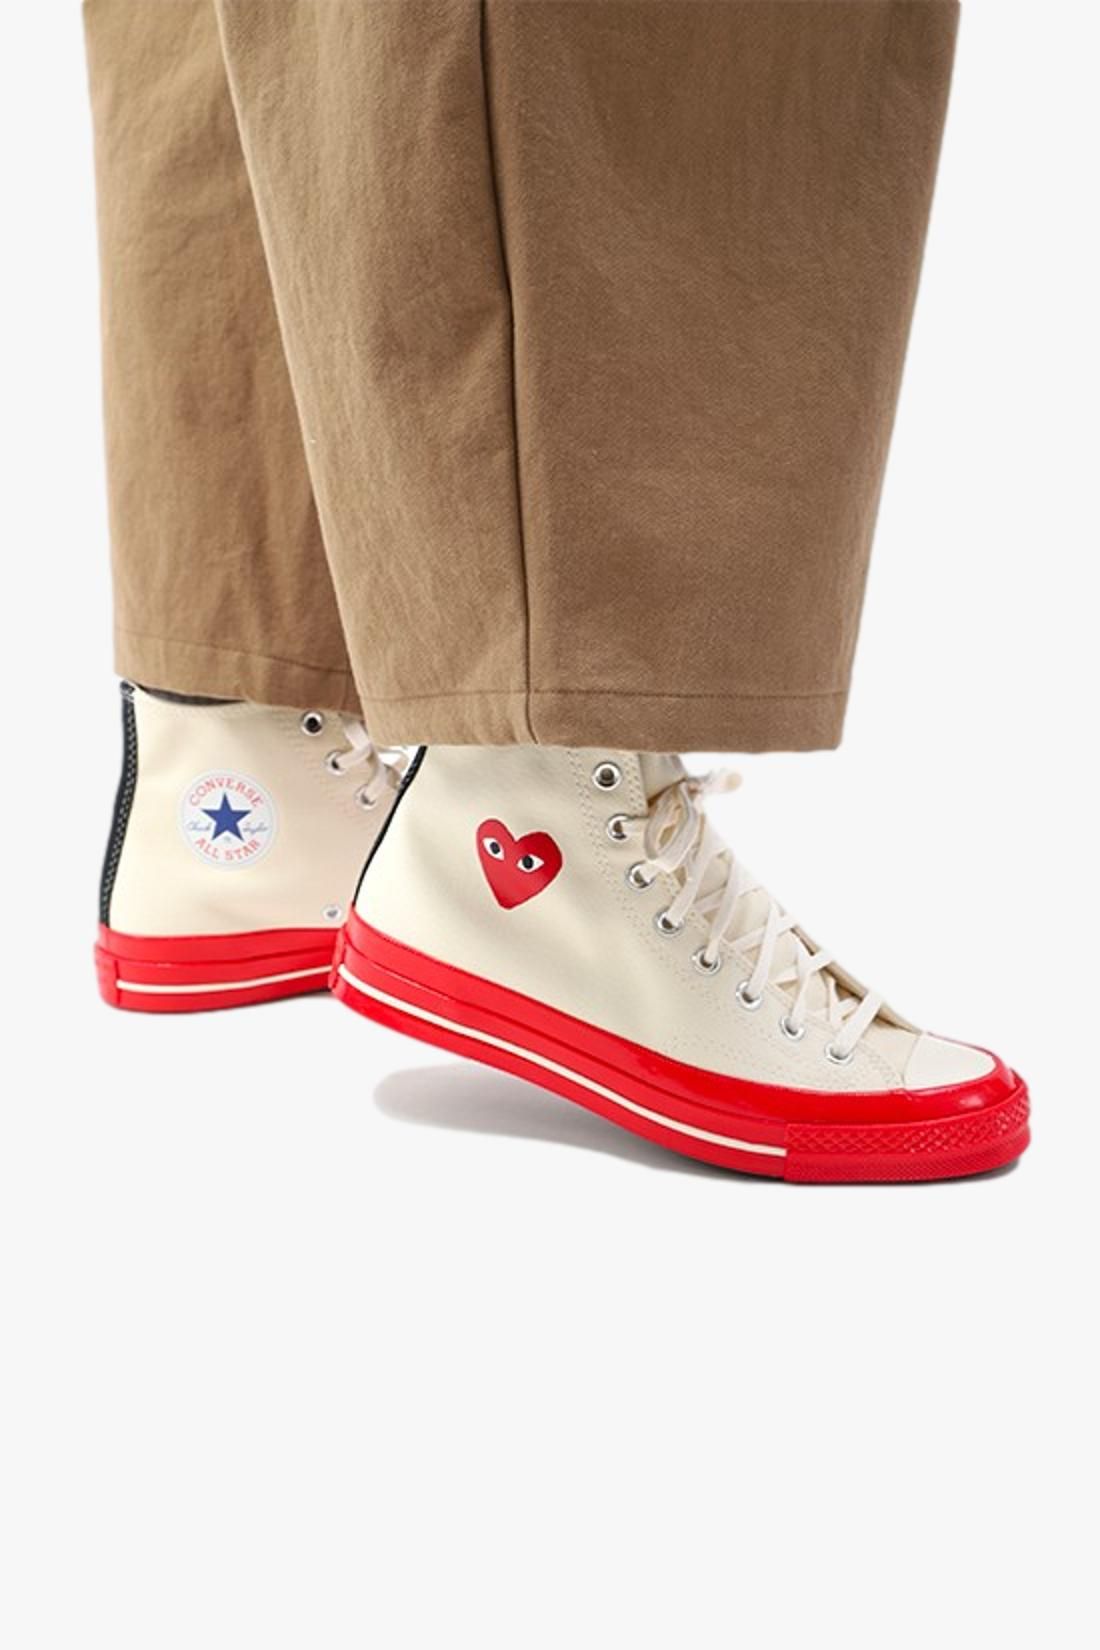 Converse red sole high top White